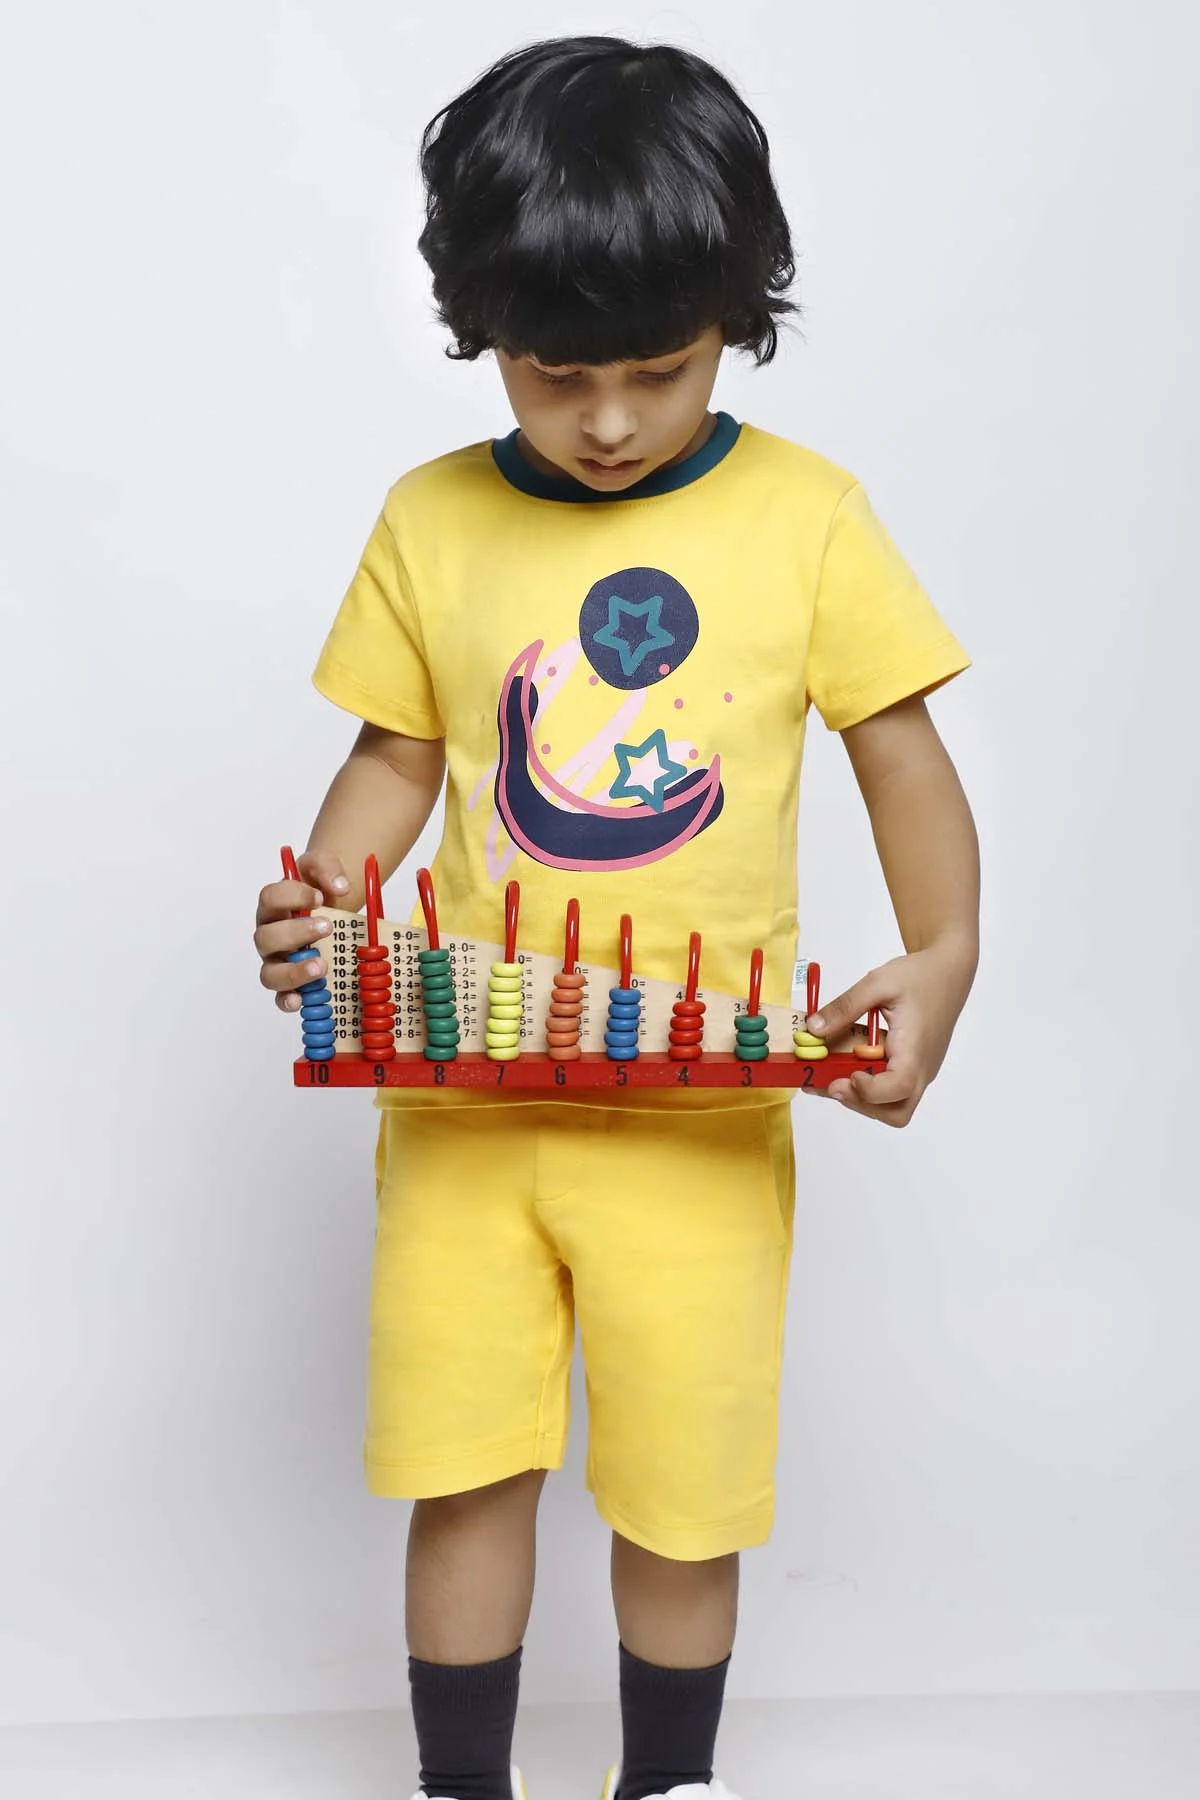 Rainbow T-shirt - Premium Kids Clothing at Great Prices